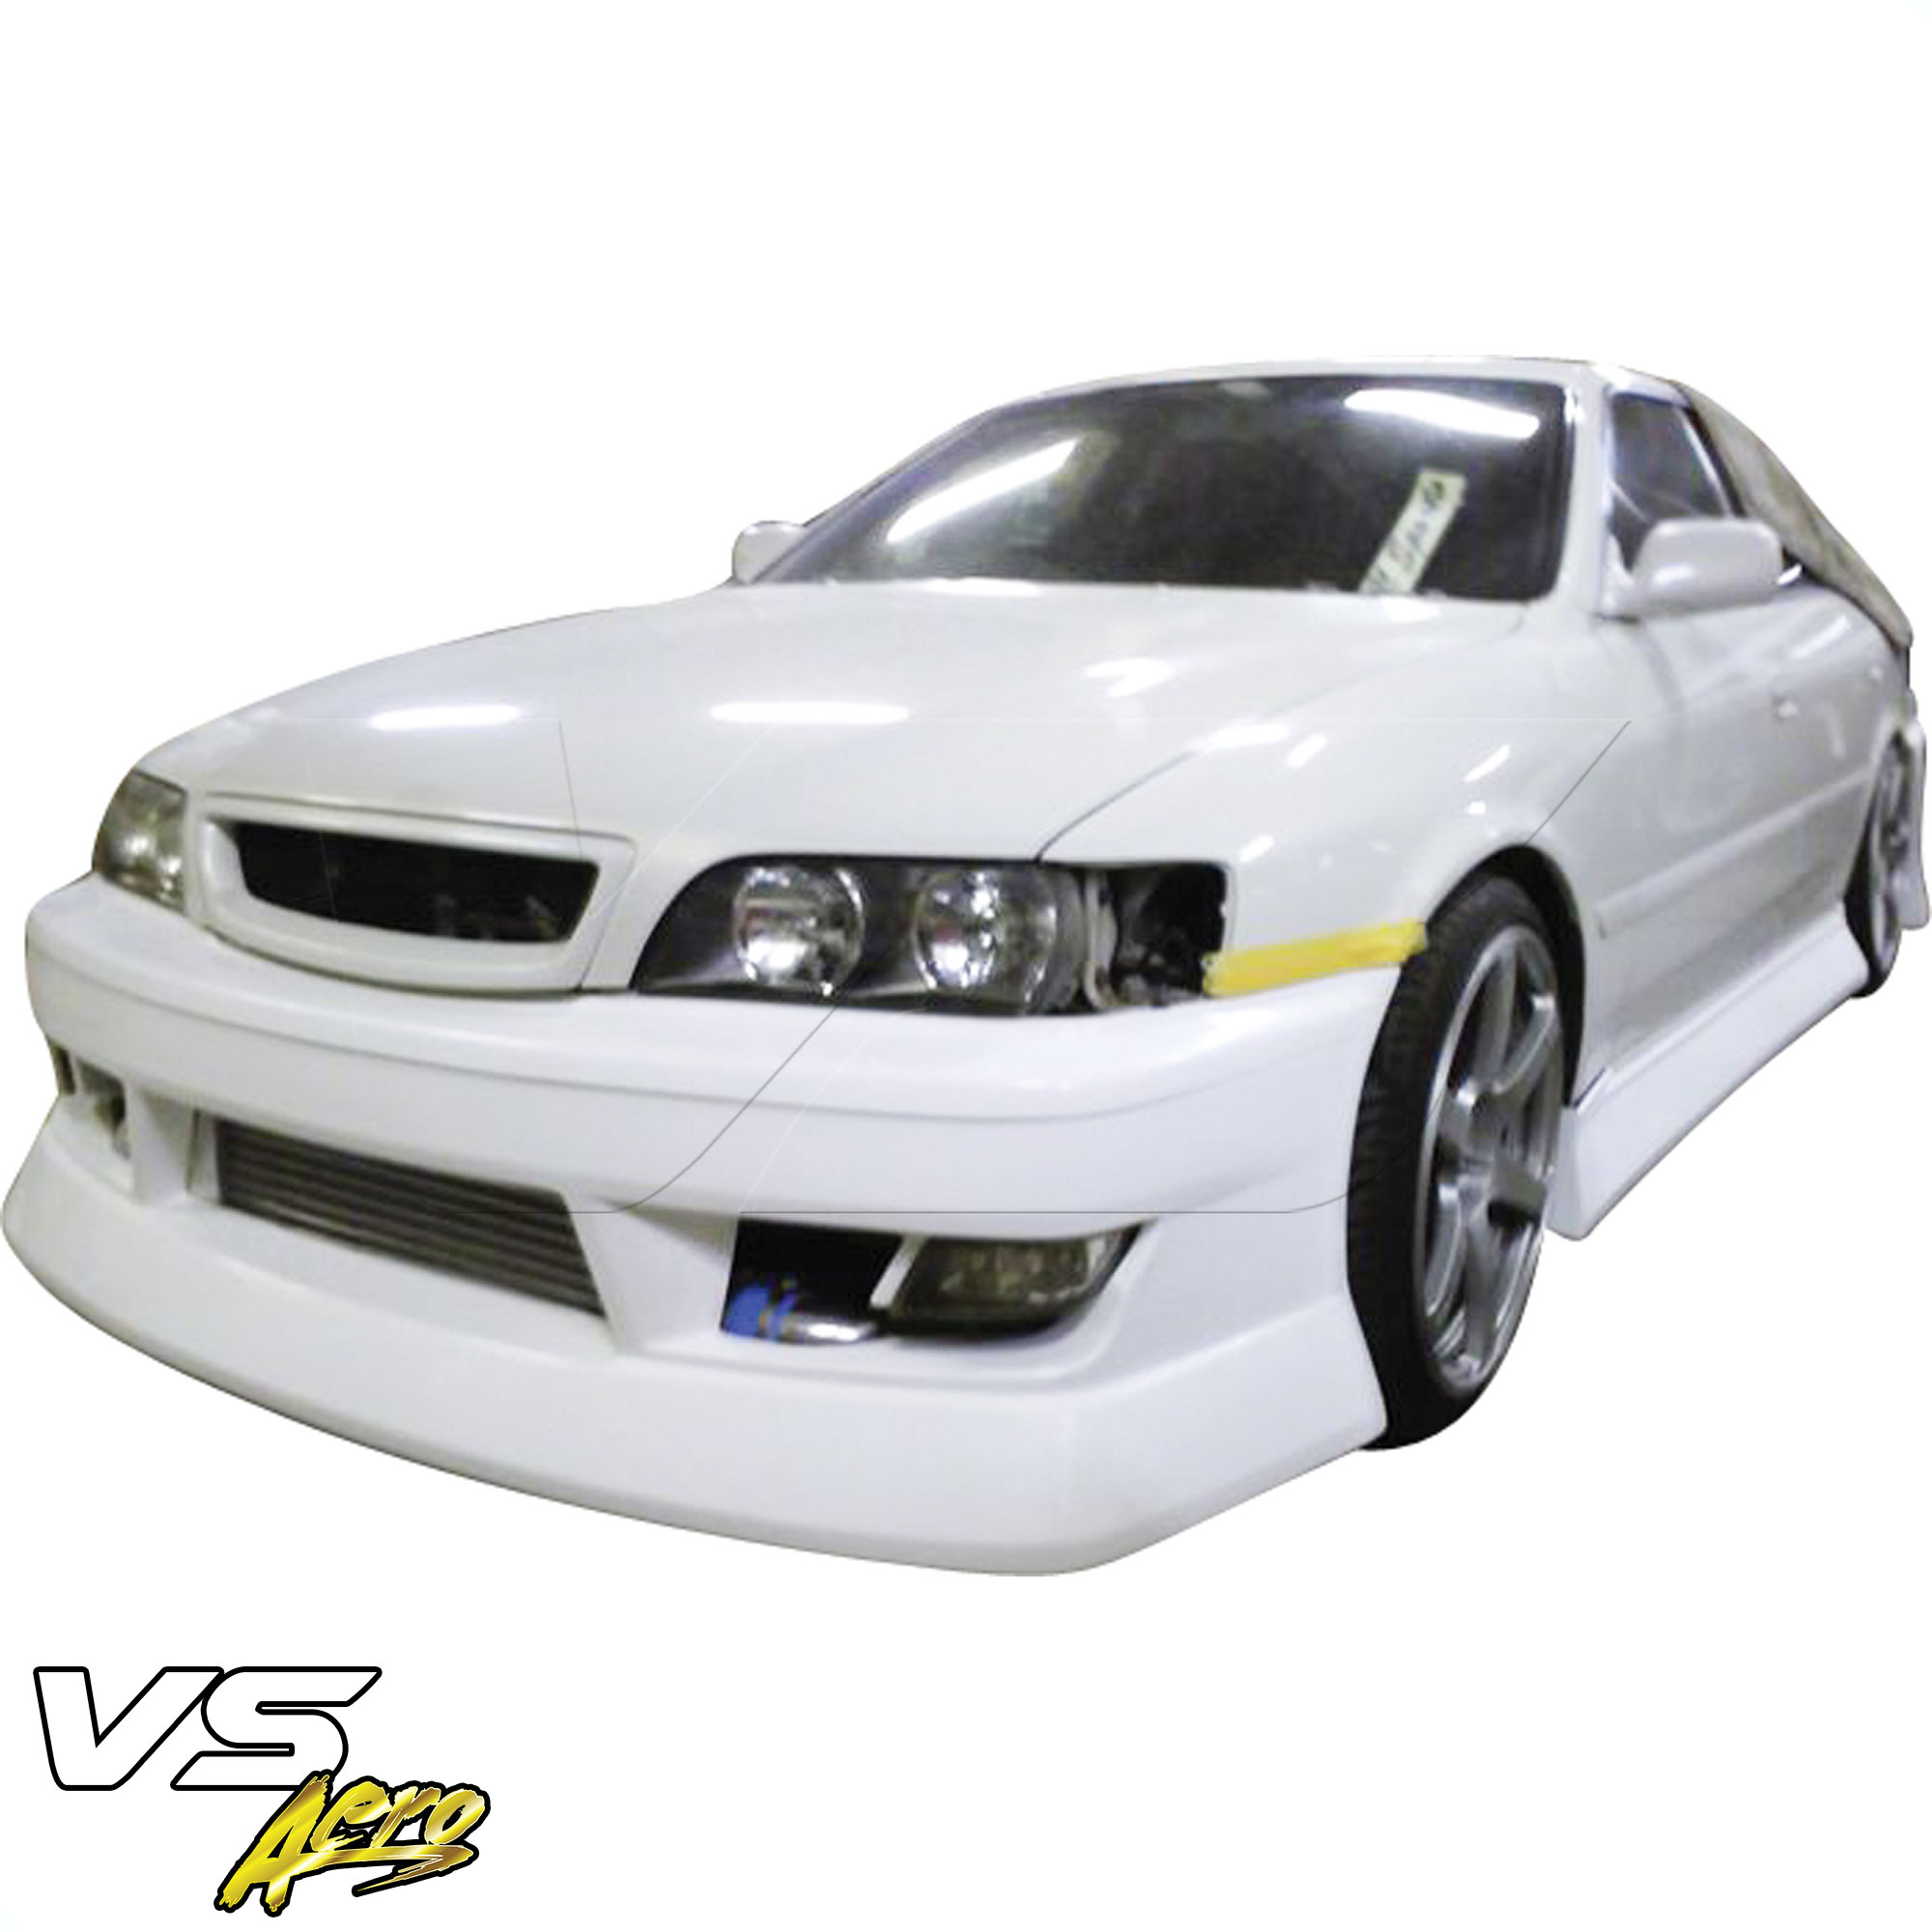 VSaero FRP BSPO Front Bumper > Toyota Chaser JZX100 1996-2000 - Image 5